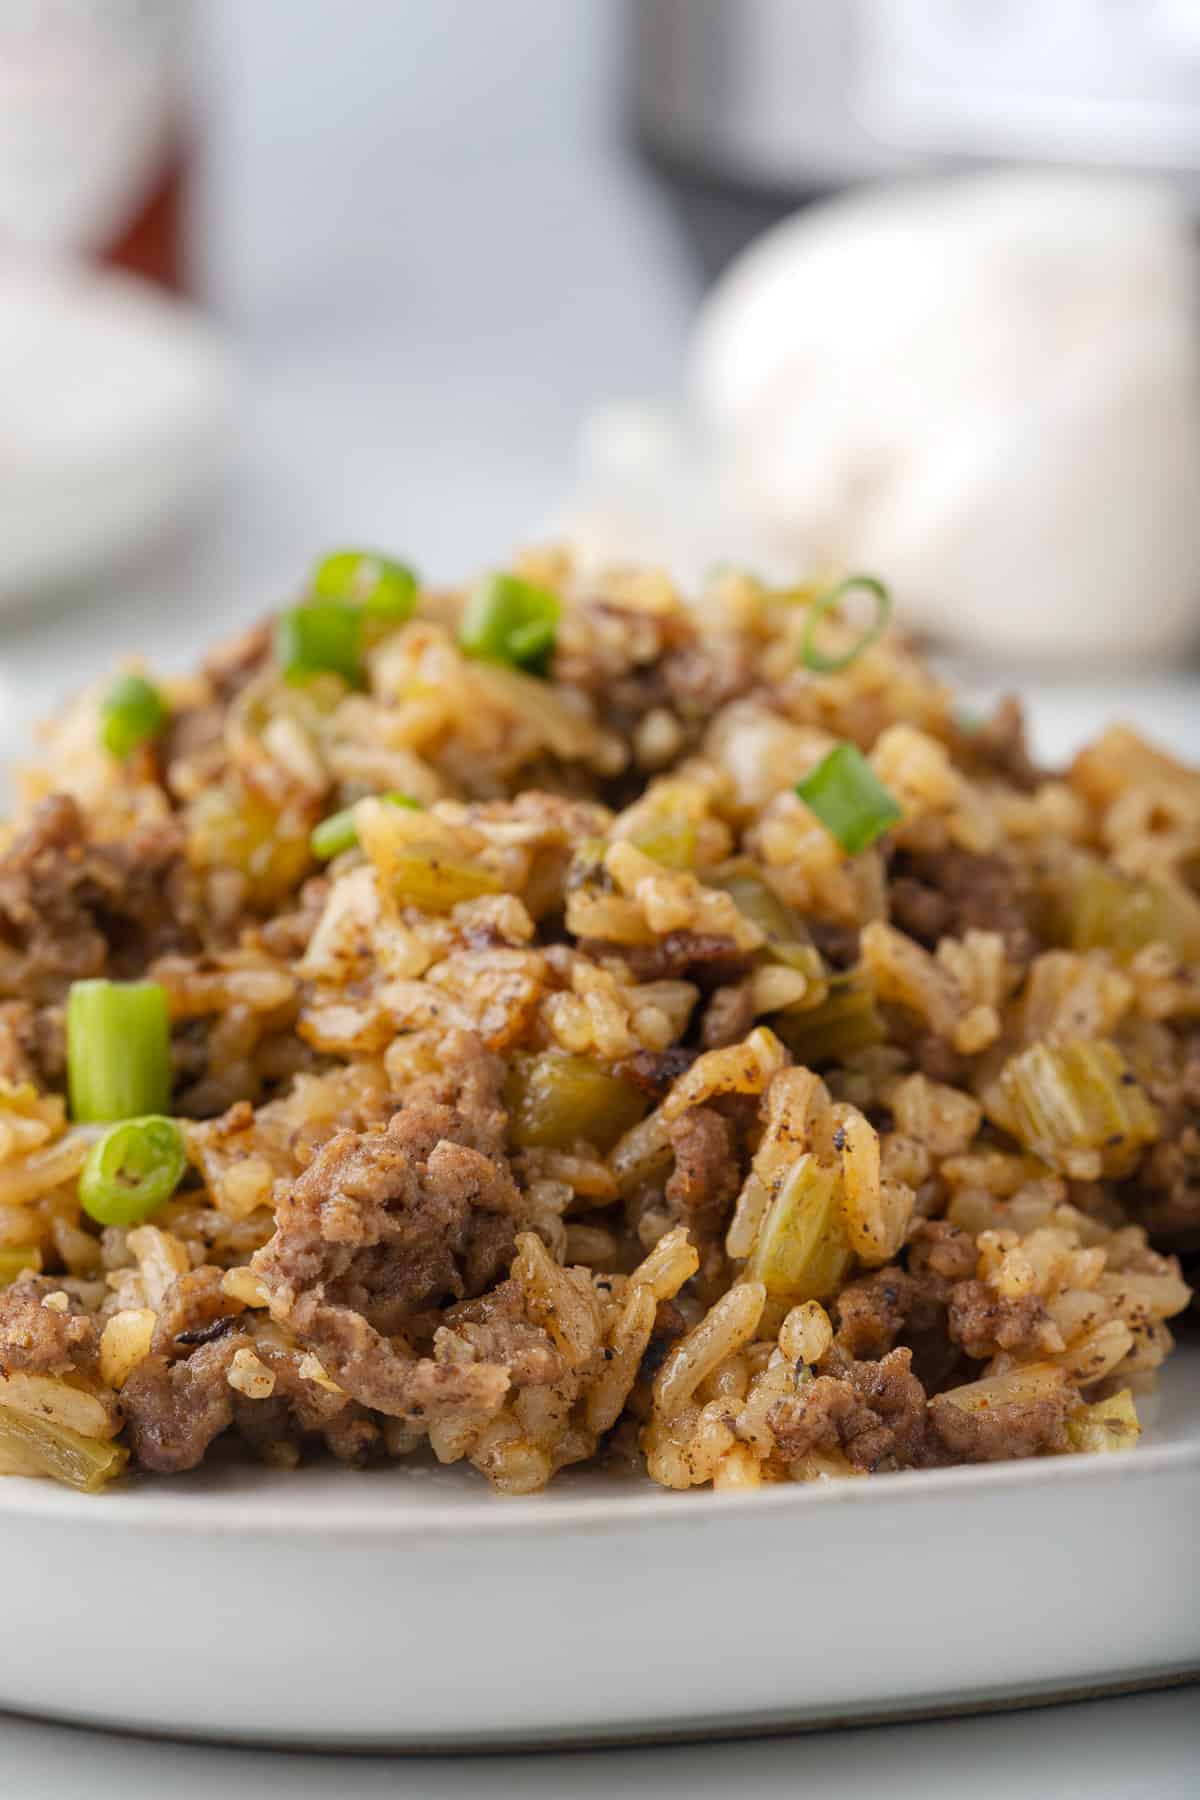 A plate of dirty rice made with ground beef.